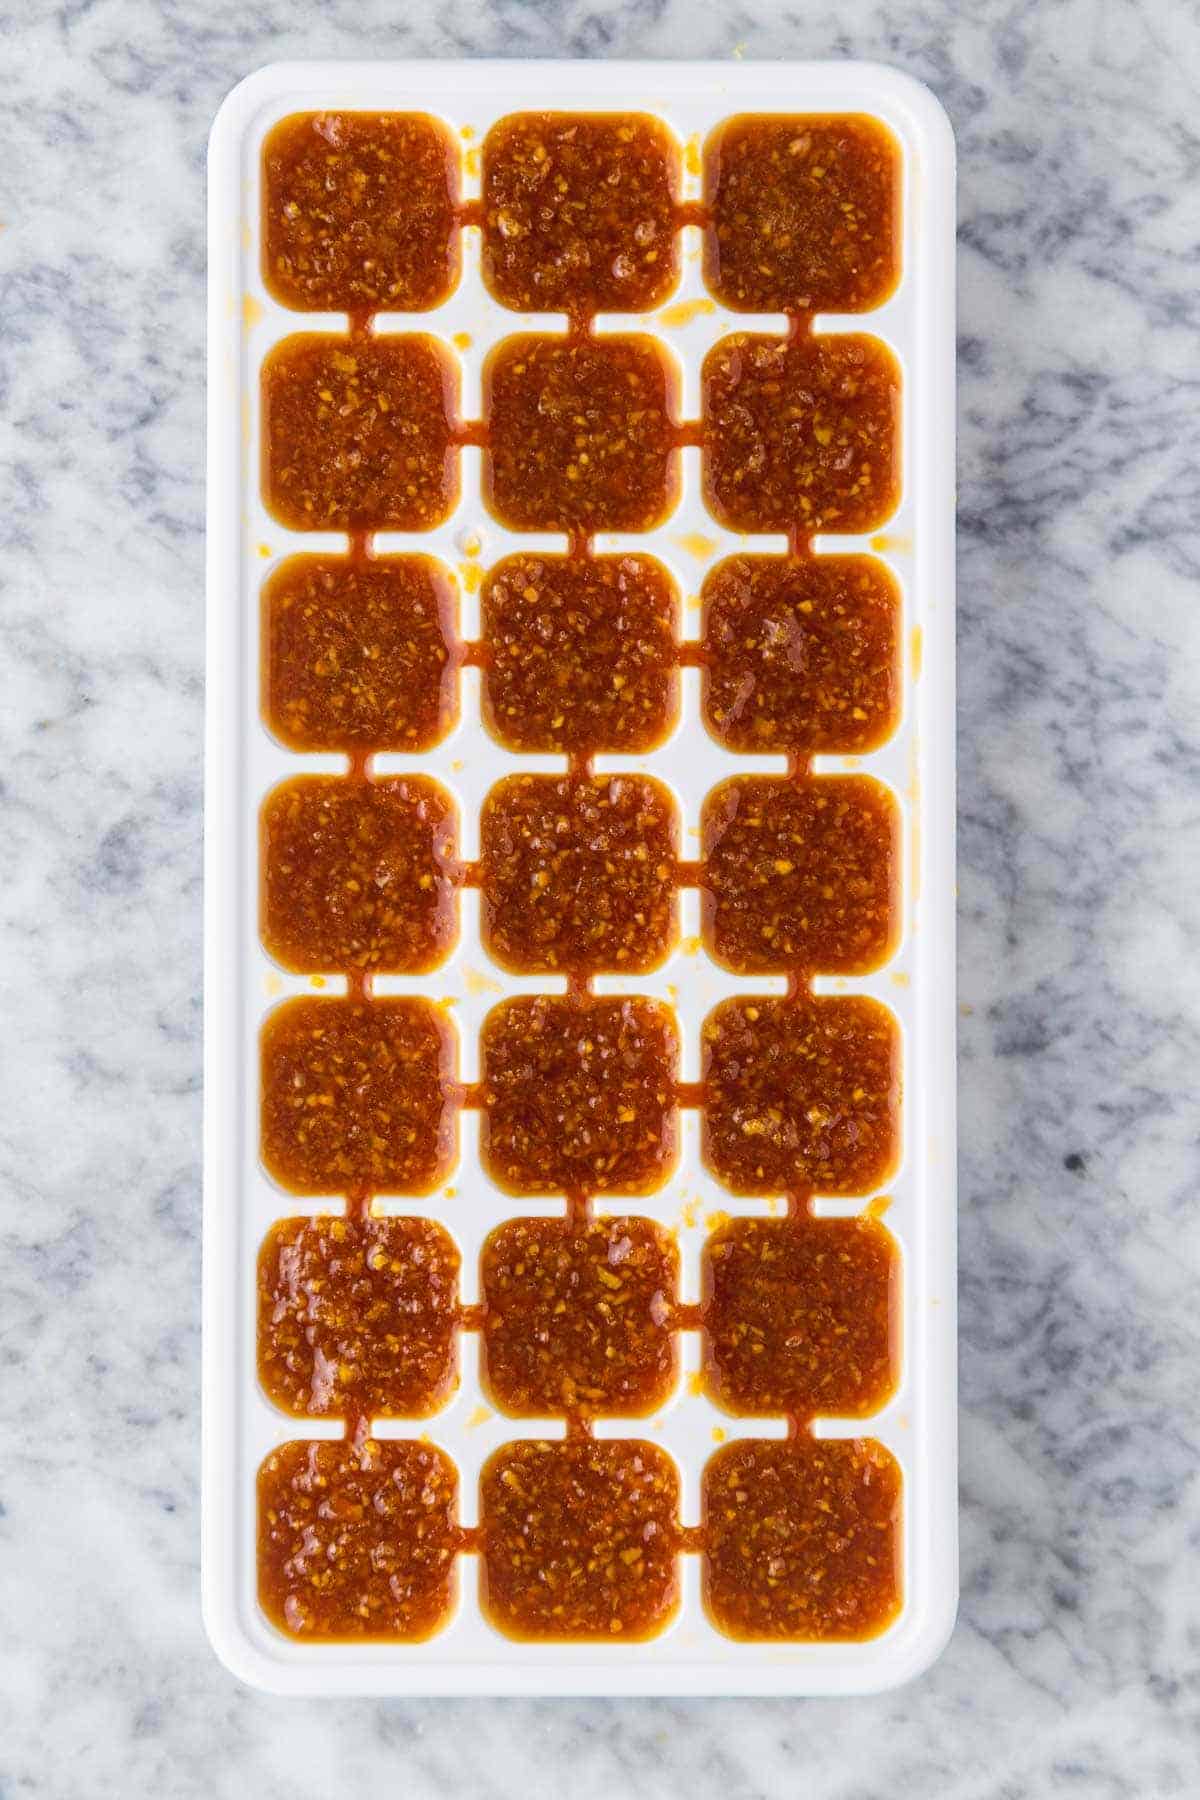 frozen sauce in an ice cube tray